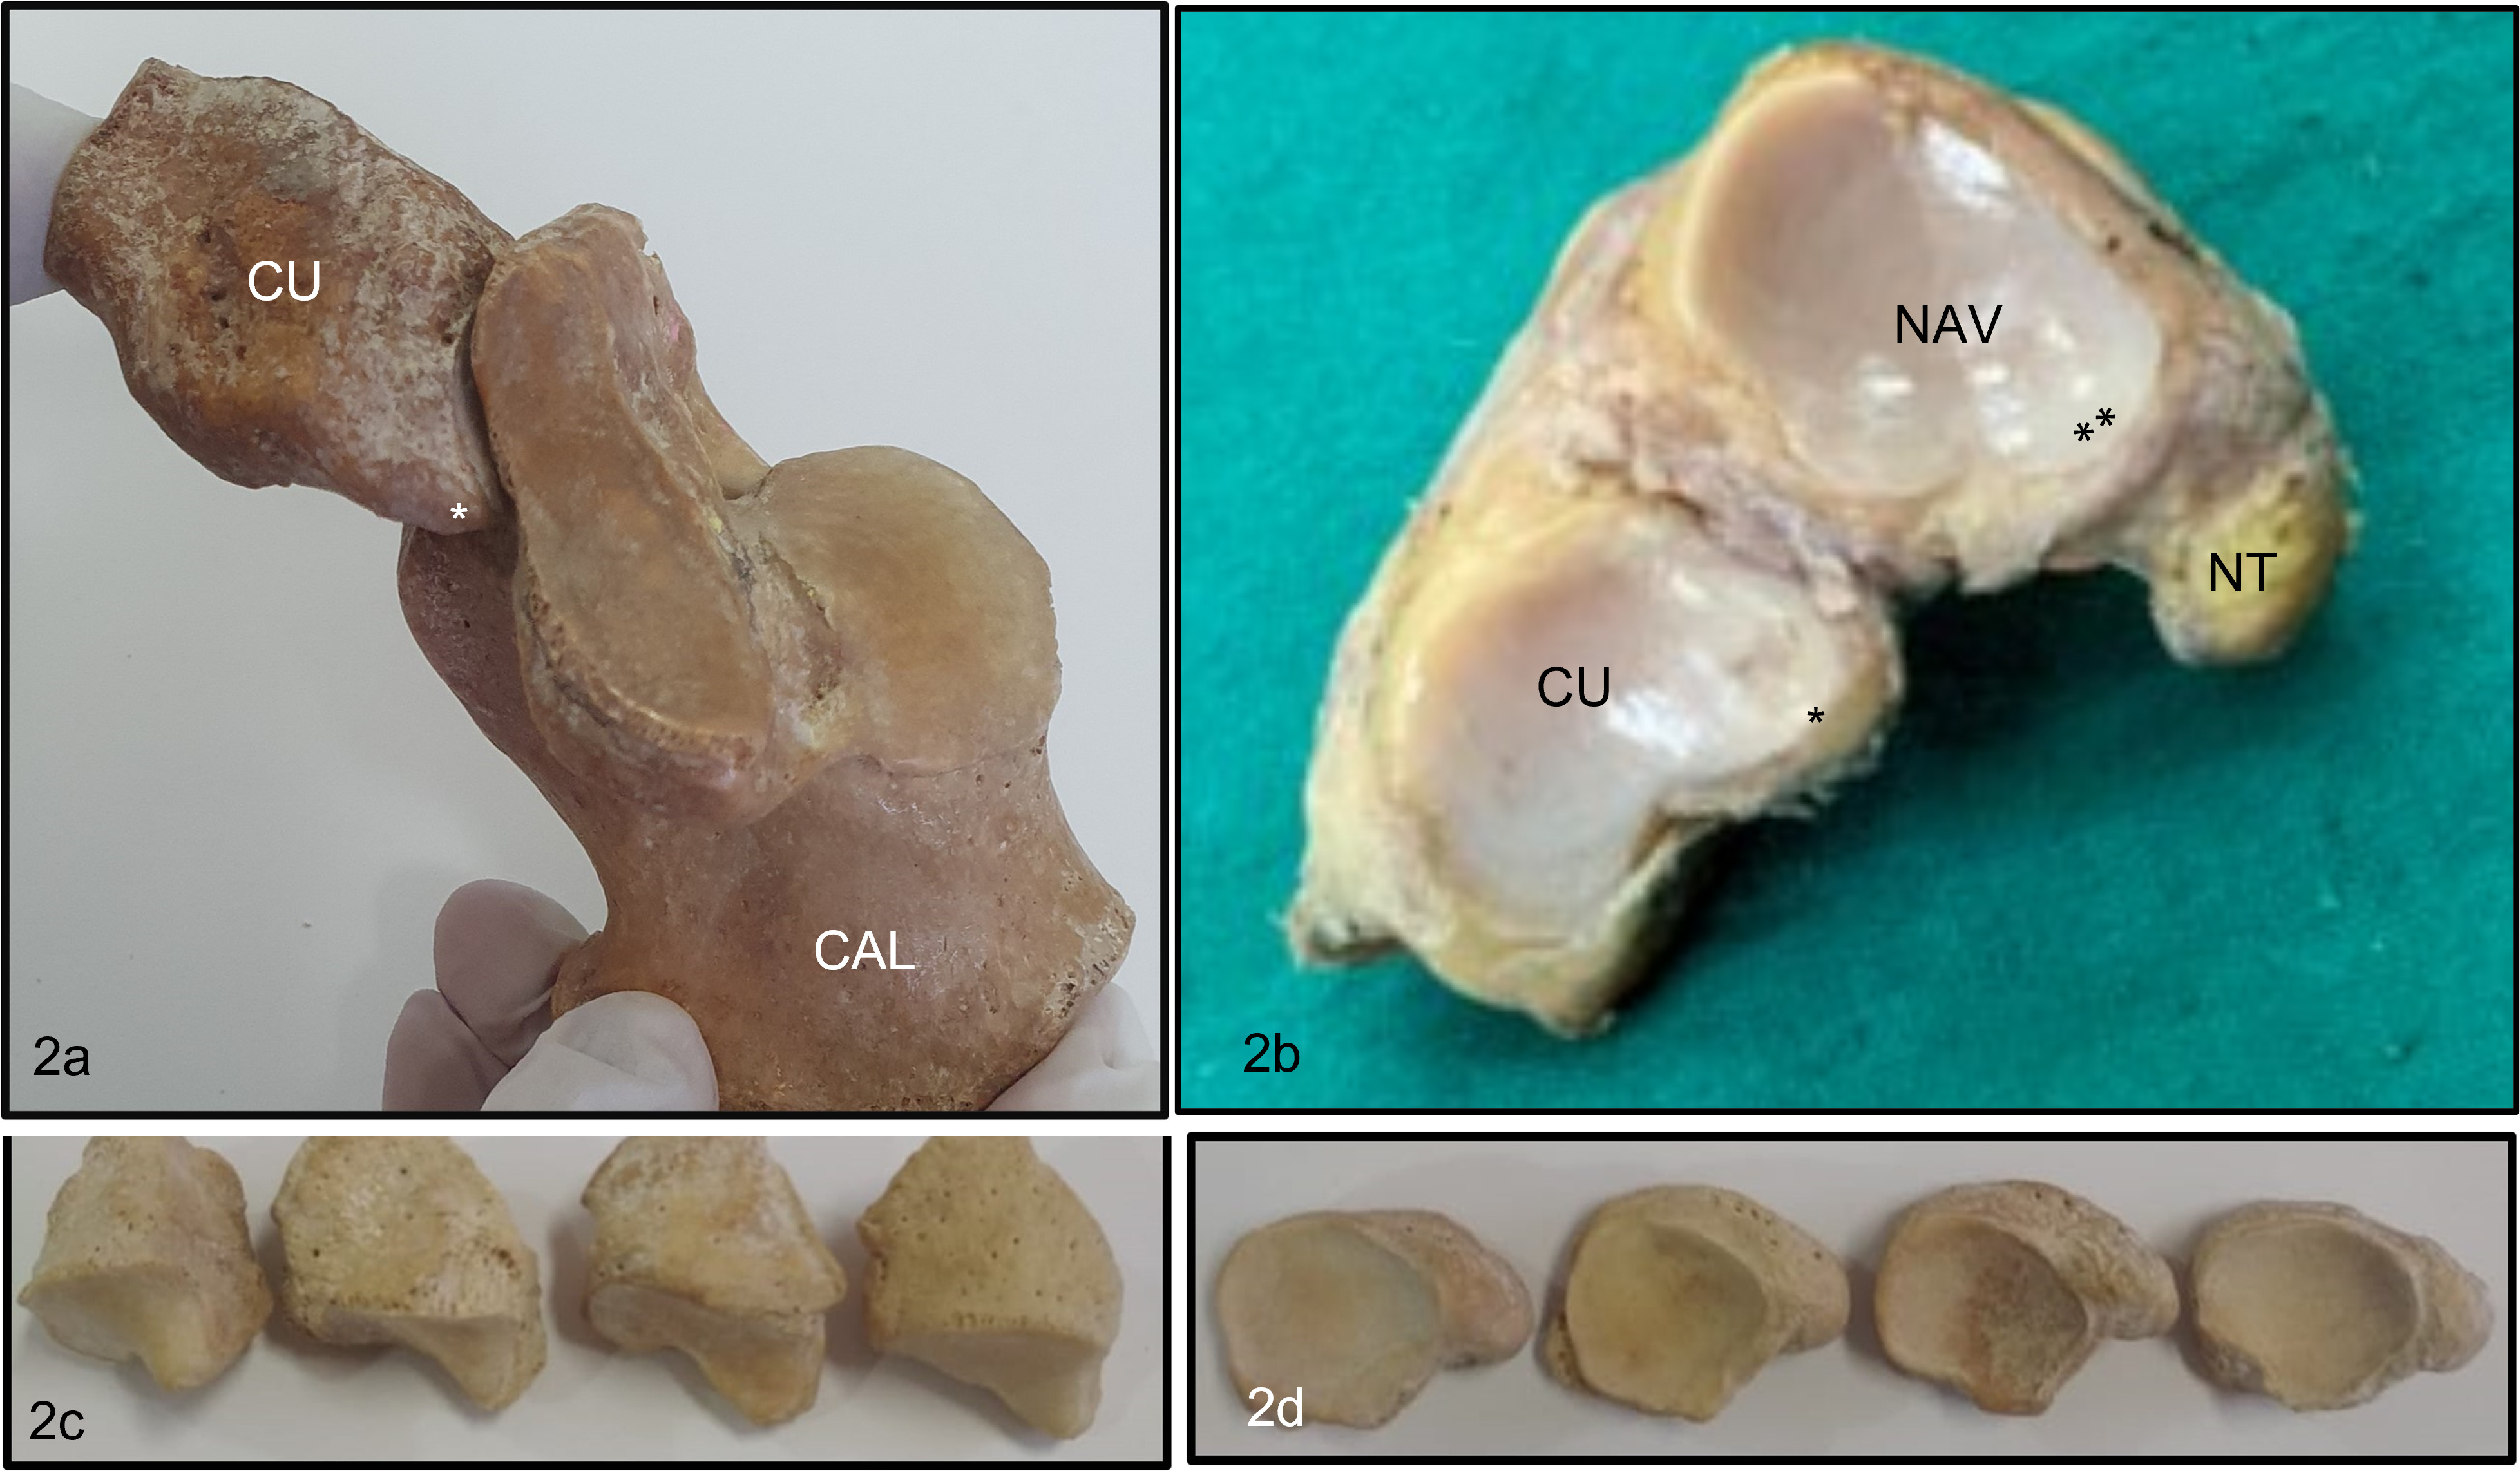 Fig. 2 
            a) Beak of cuboid fitting into the coronoid fossa of the calcaneus, b) shelf-like inferior supports of the cuboid (*) and navicular (**), c) beaks of the cuboid bone. and d) beaks of the navicular bone. CAL, calcaneus; CU, cuboid; NAV, navicular; NT, navicular tuberosity.
          